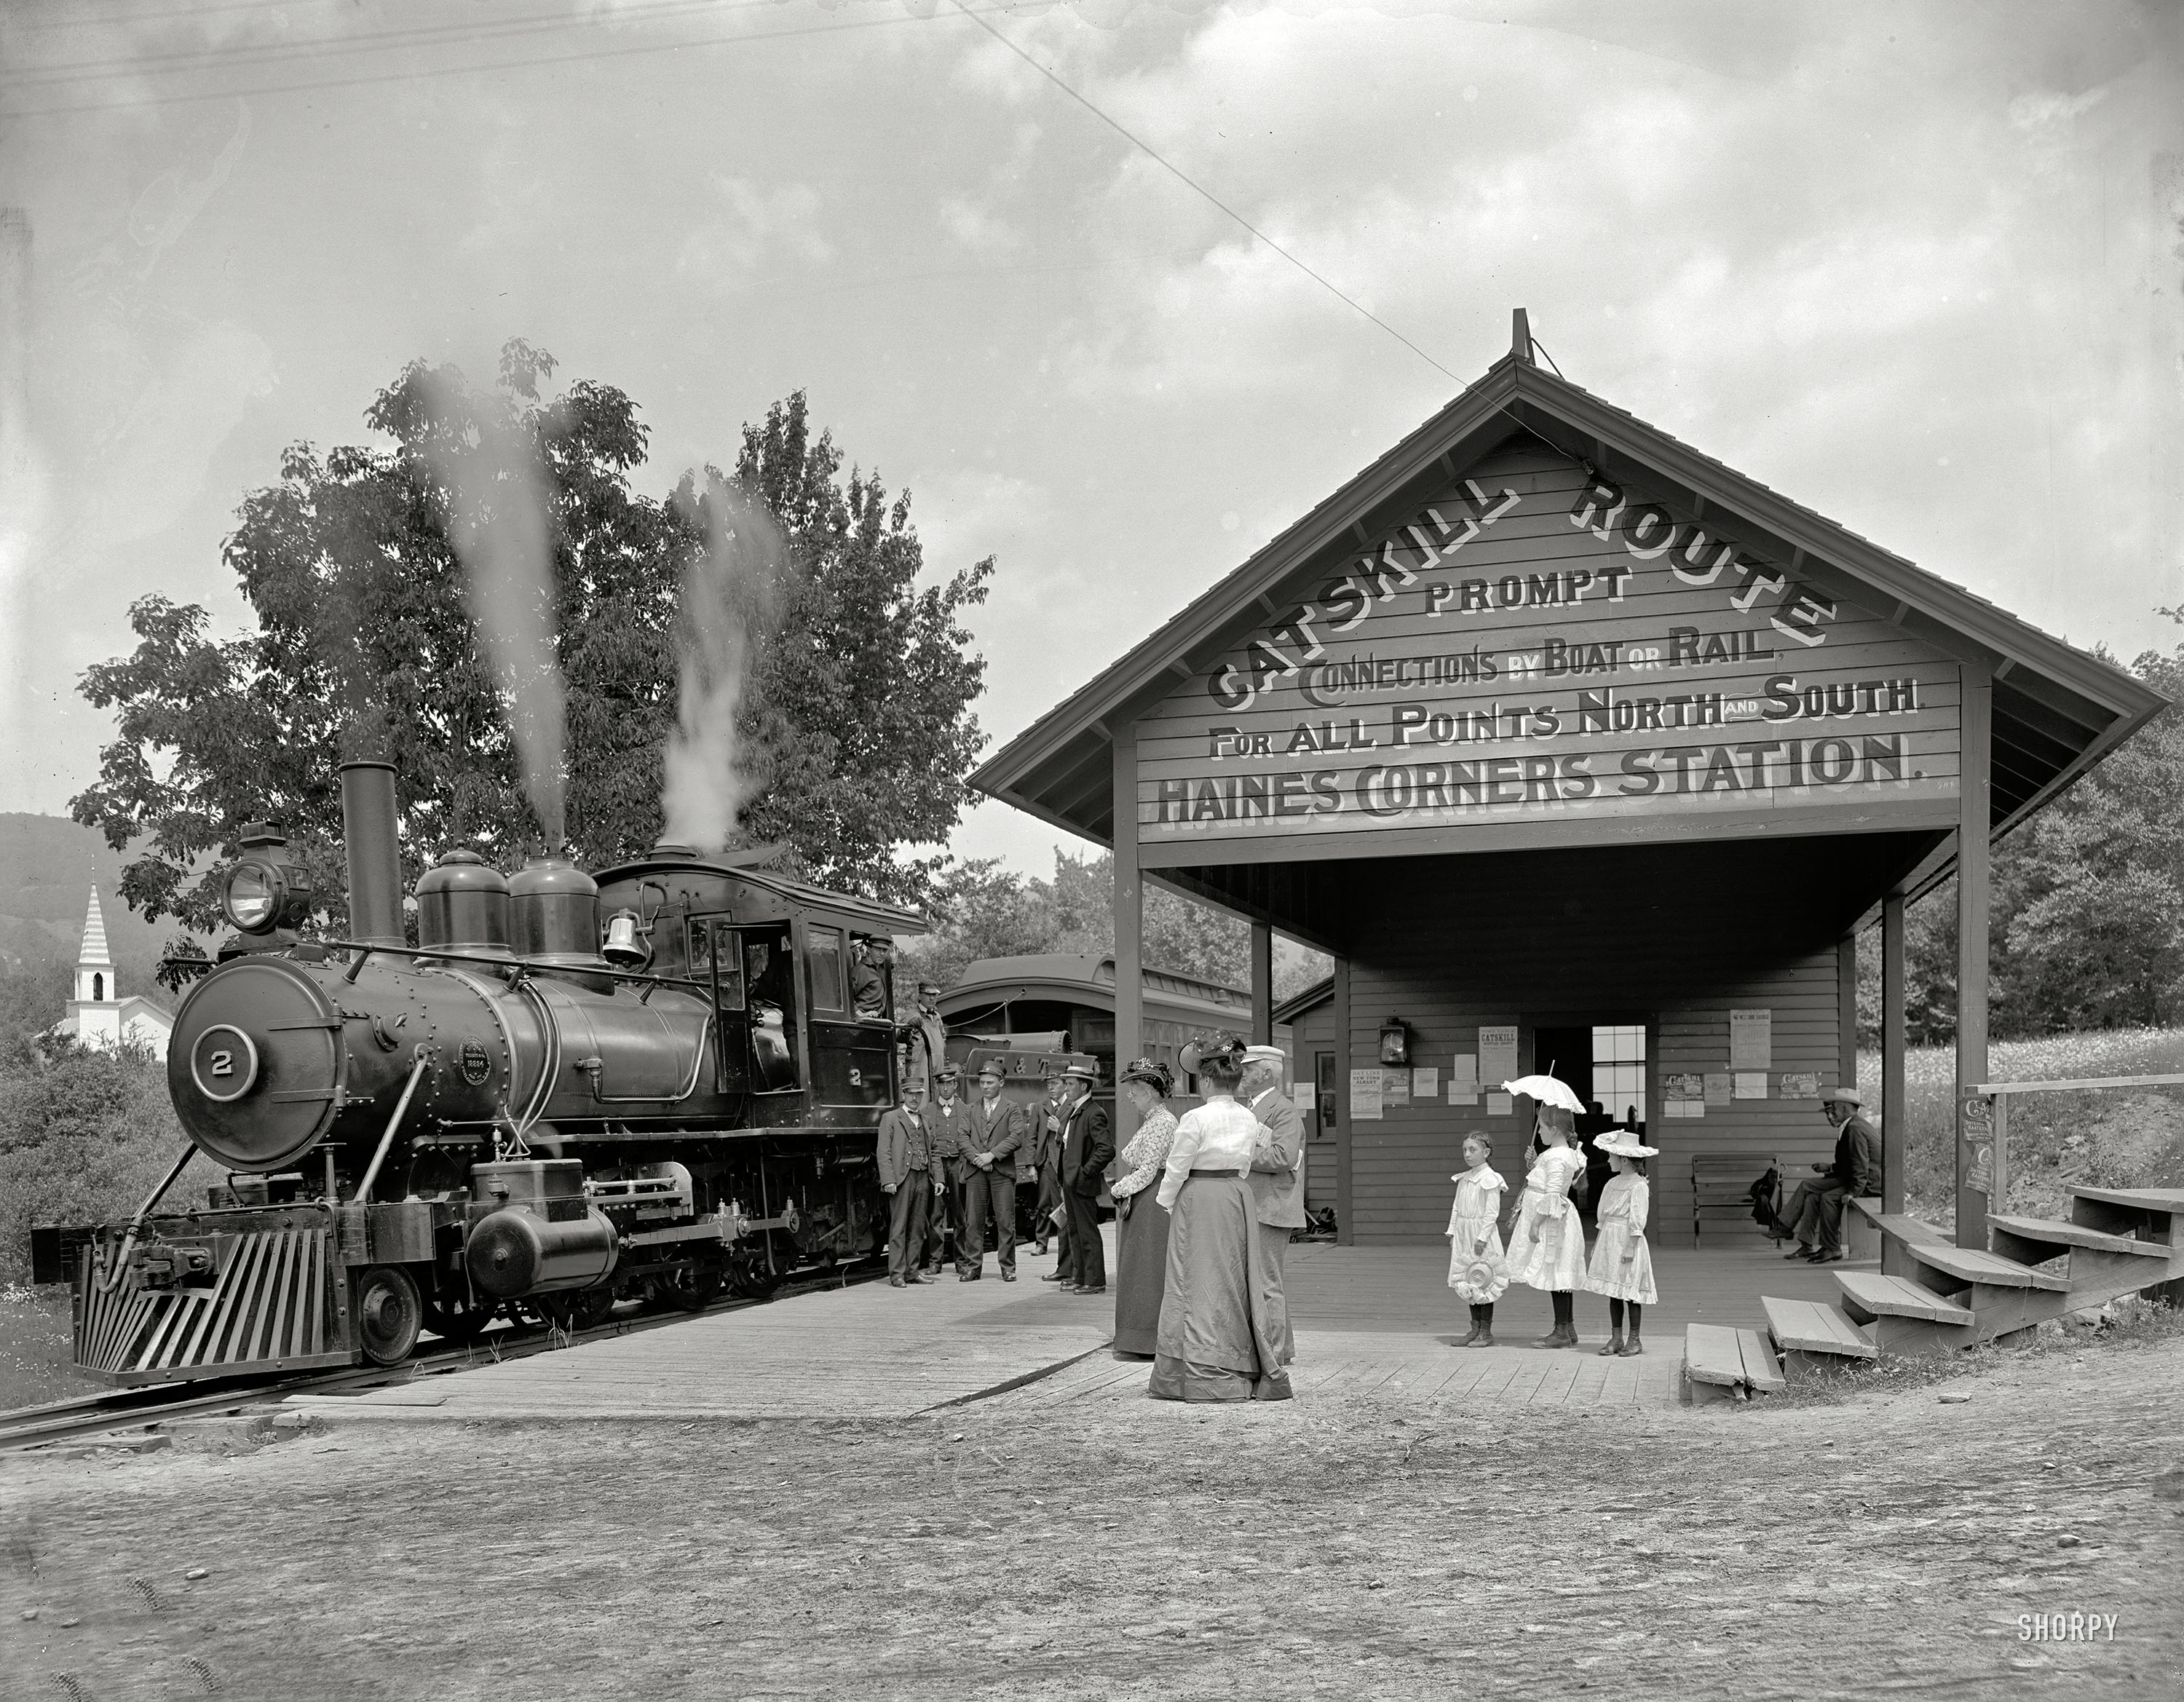 Circa 1902. "Catskill Mountain railway station, Haines Corners, N.Y." 8x10 inch dry plate glass negative, Detroit Publishing Company. View full size.